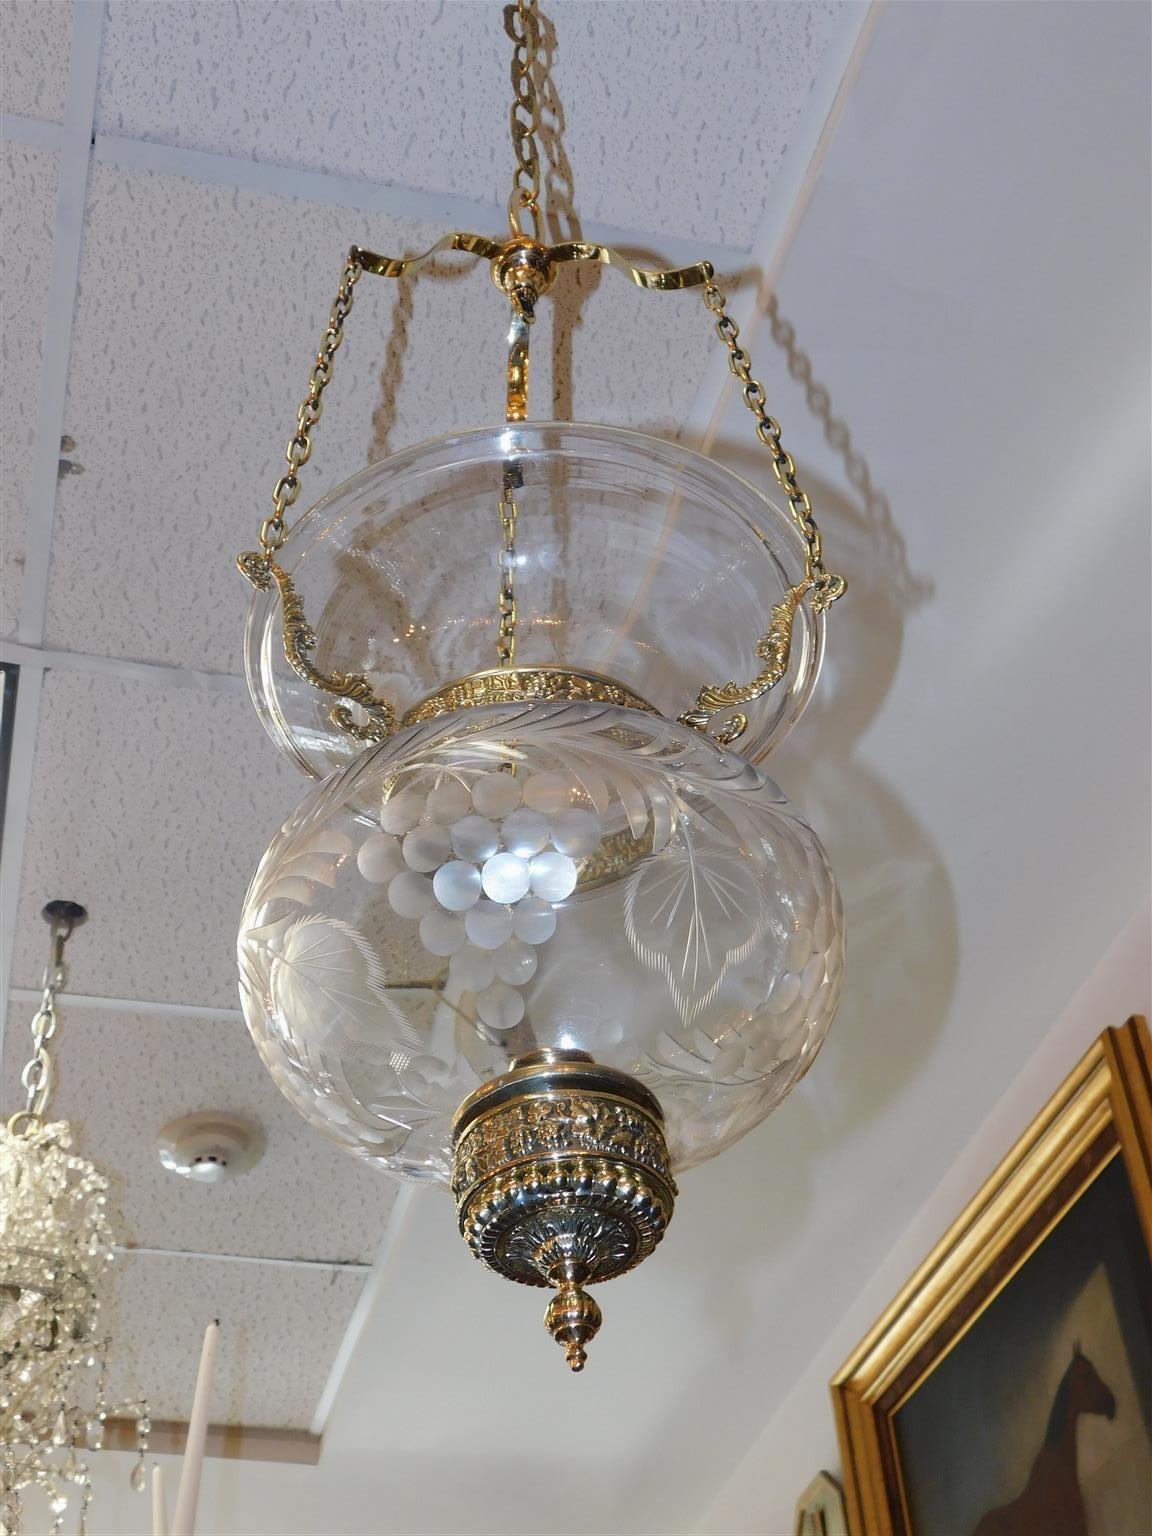 American Brass & Etched Floral Glass Globe Hanging Bell Jar Hall Lantern, C 1800 For Sale 3